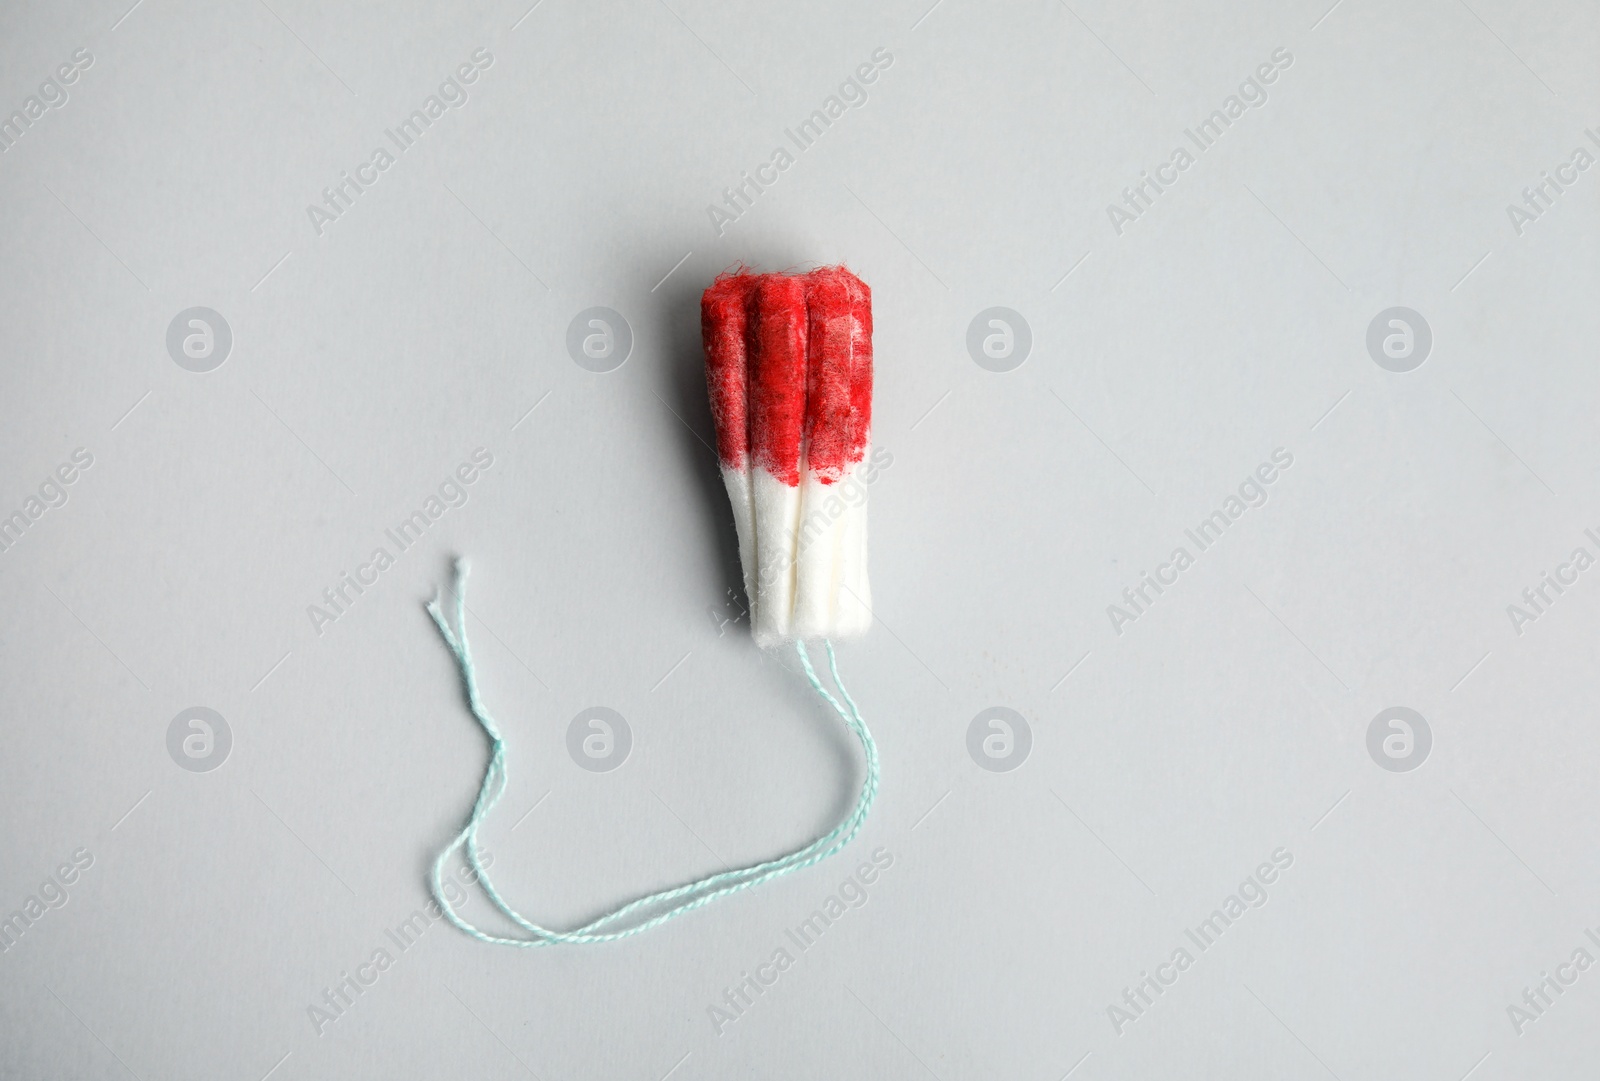 Photo of Used tampon on light grey background, top view